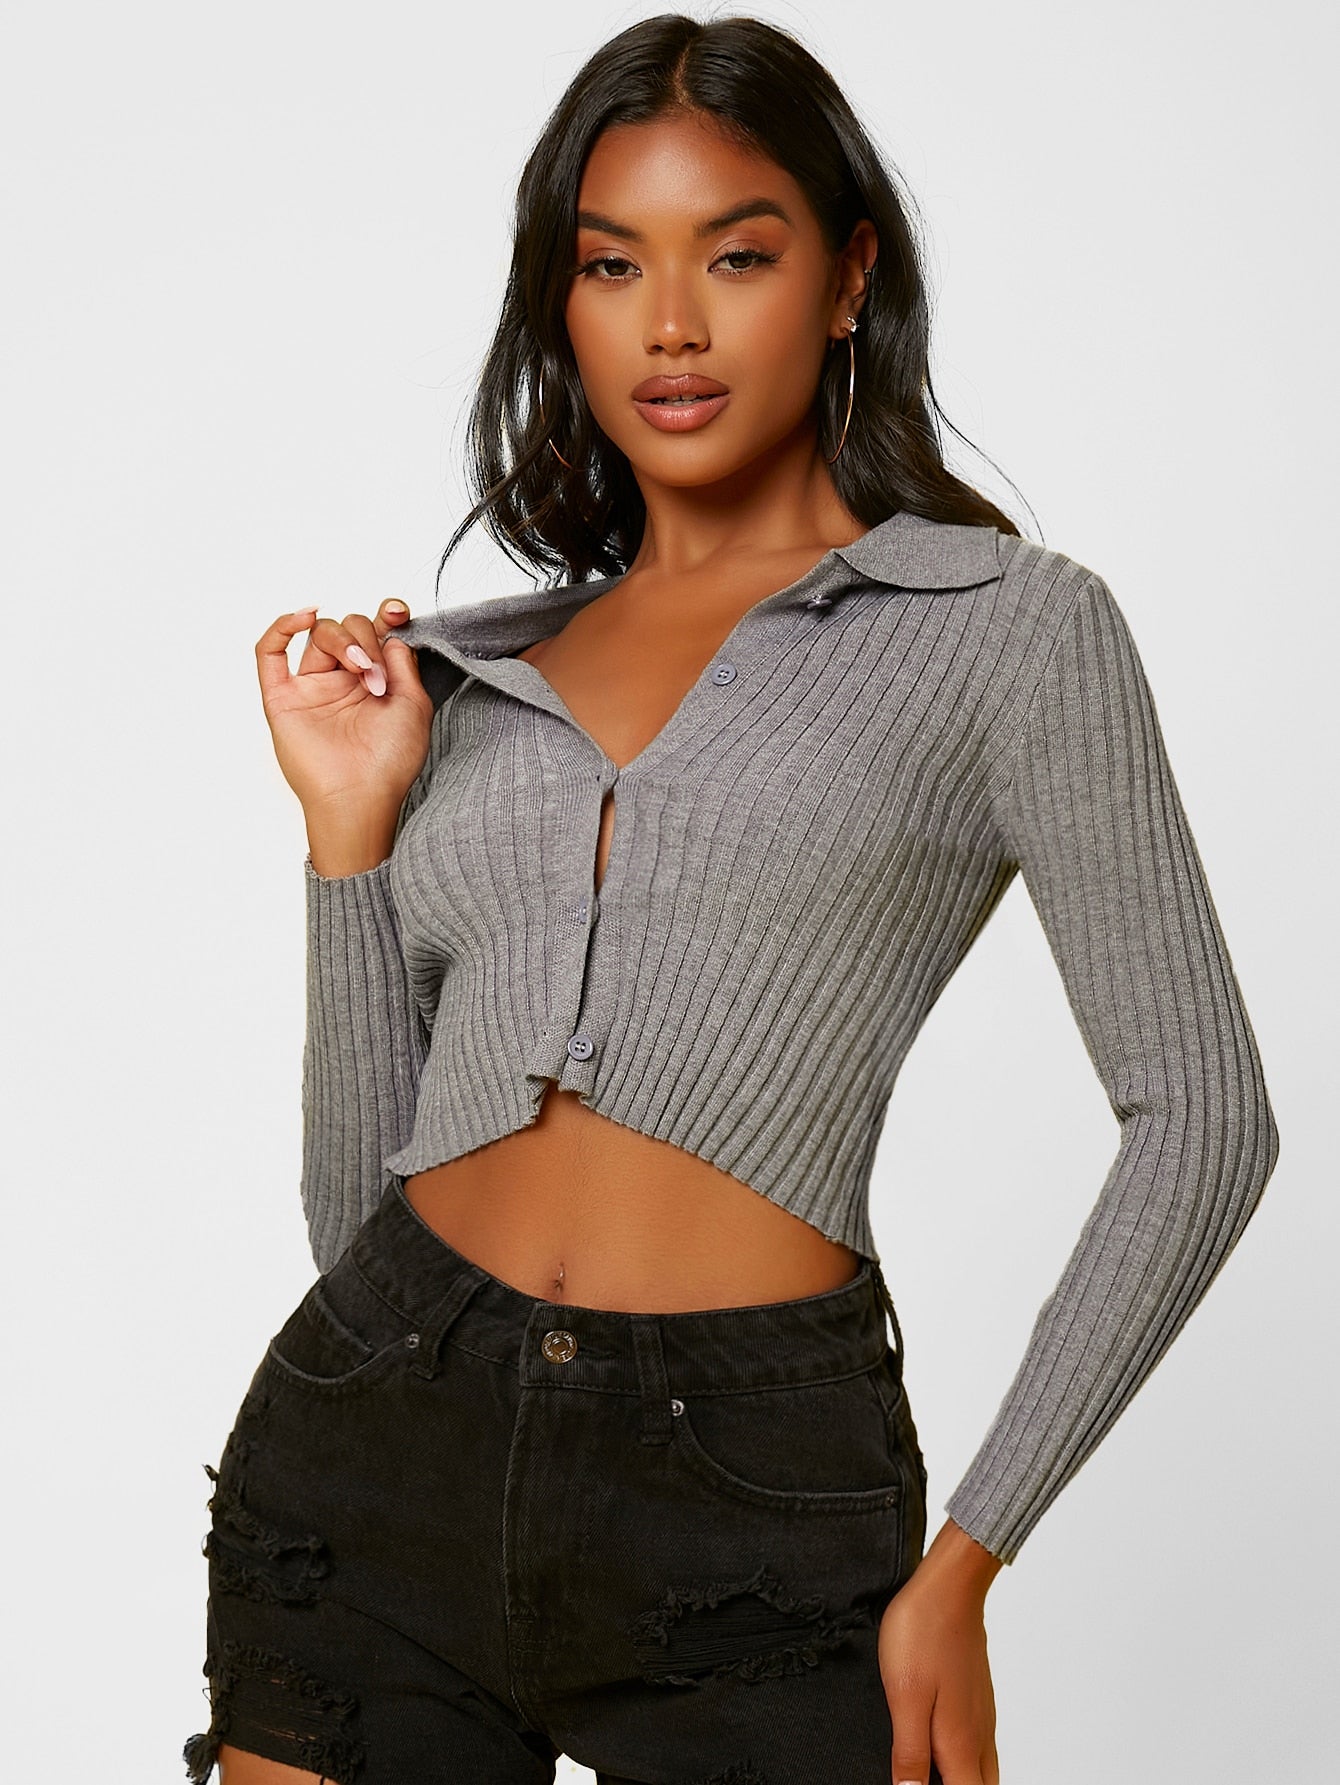 Grey Solid Collared Button Up Crop Cardigan Top